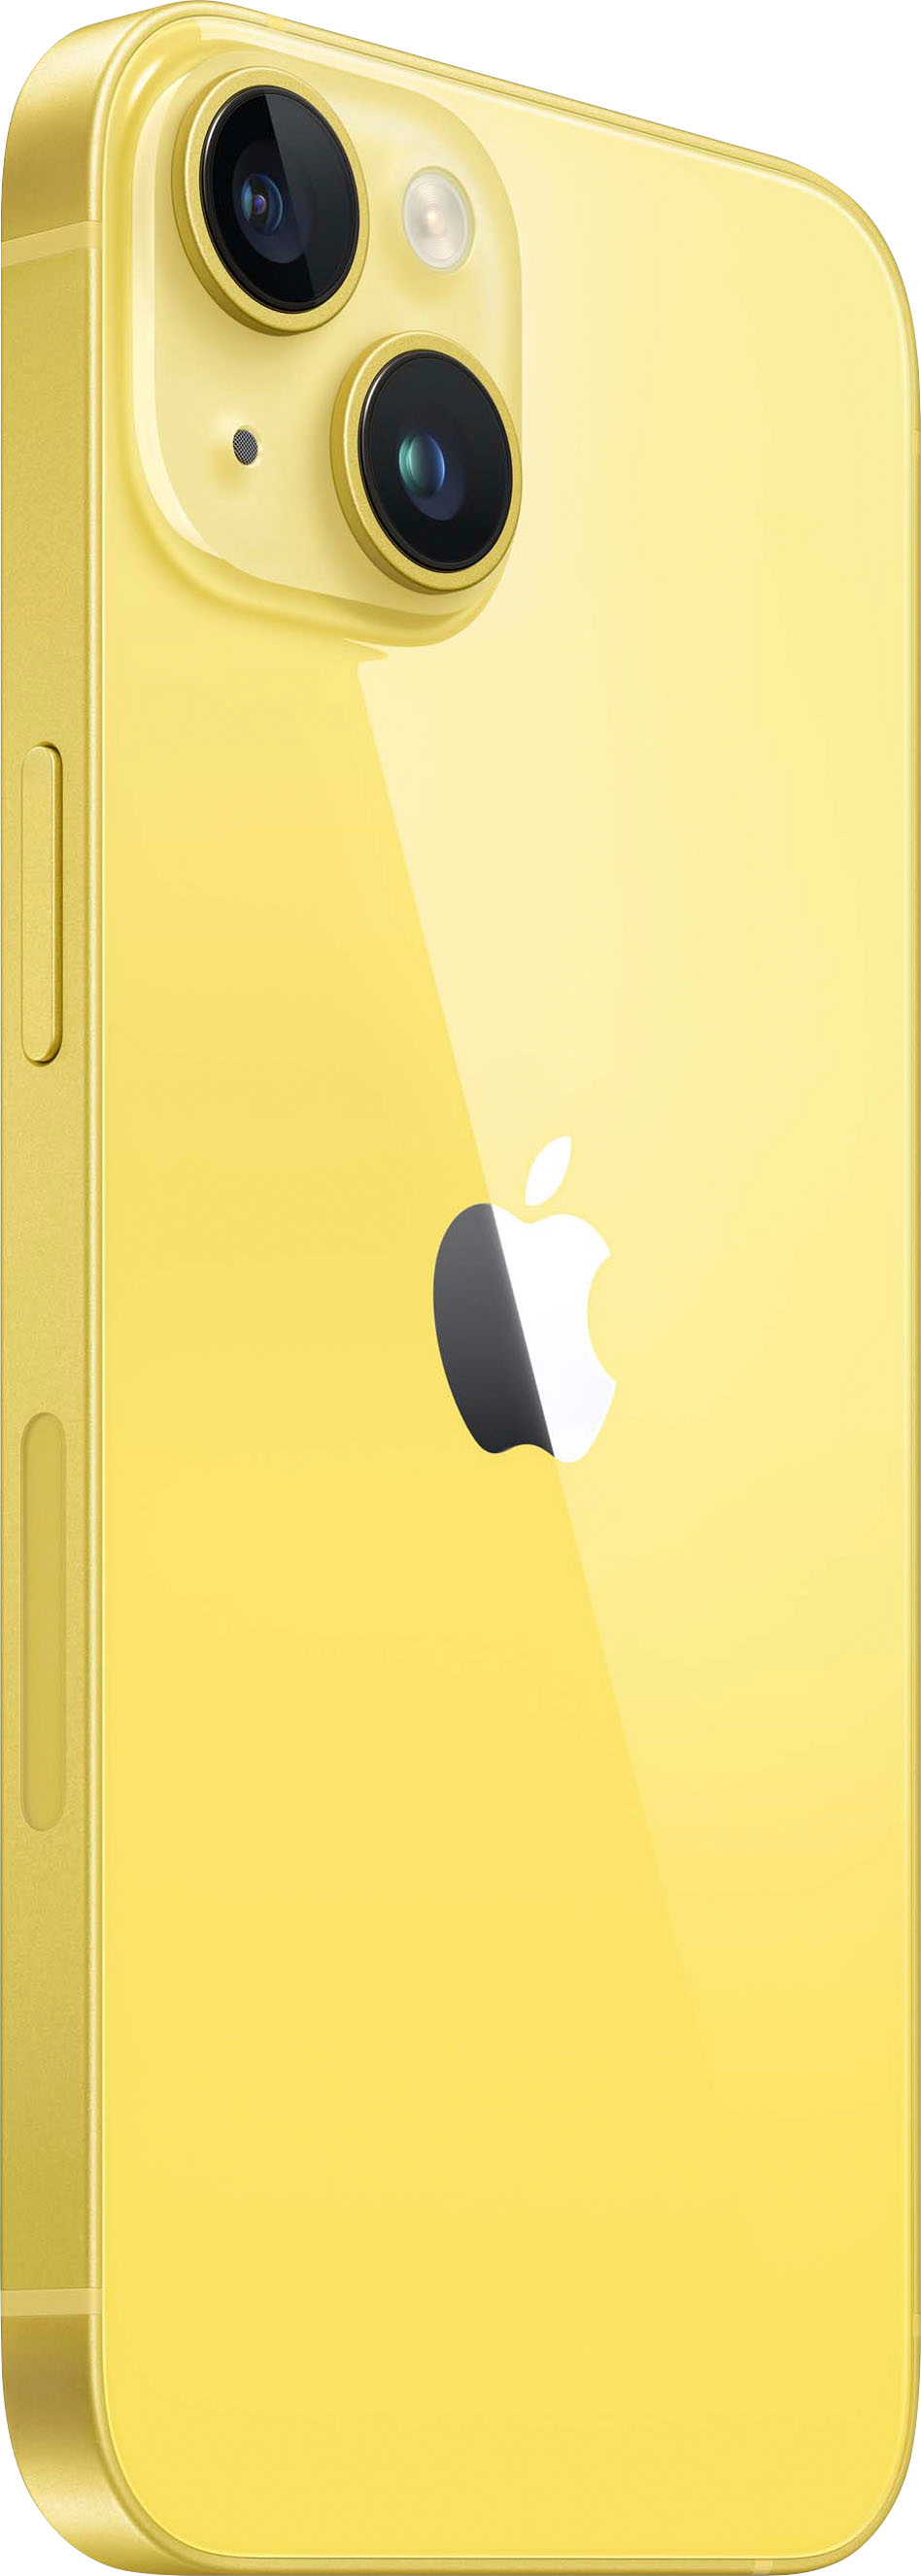 Apple iPhone 14 - 256gb - Yellow - OPEN BOX NEW COND. See Description